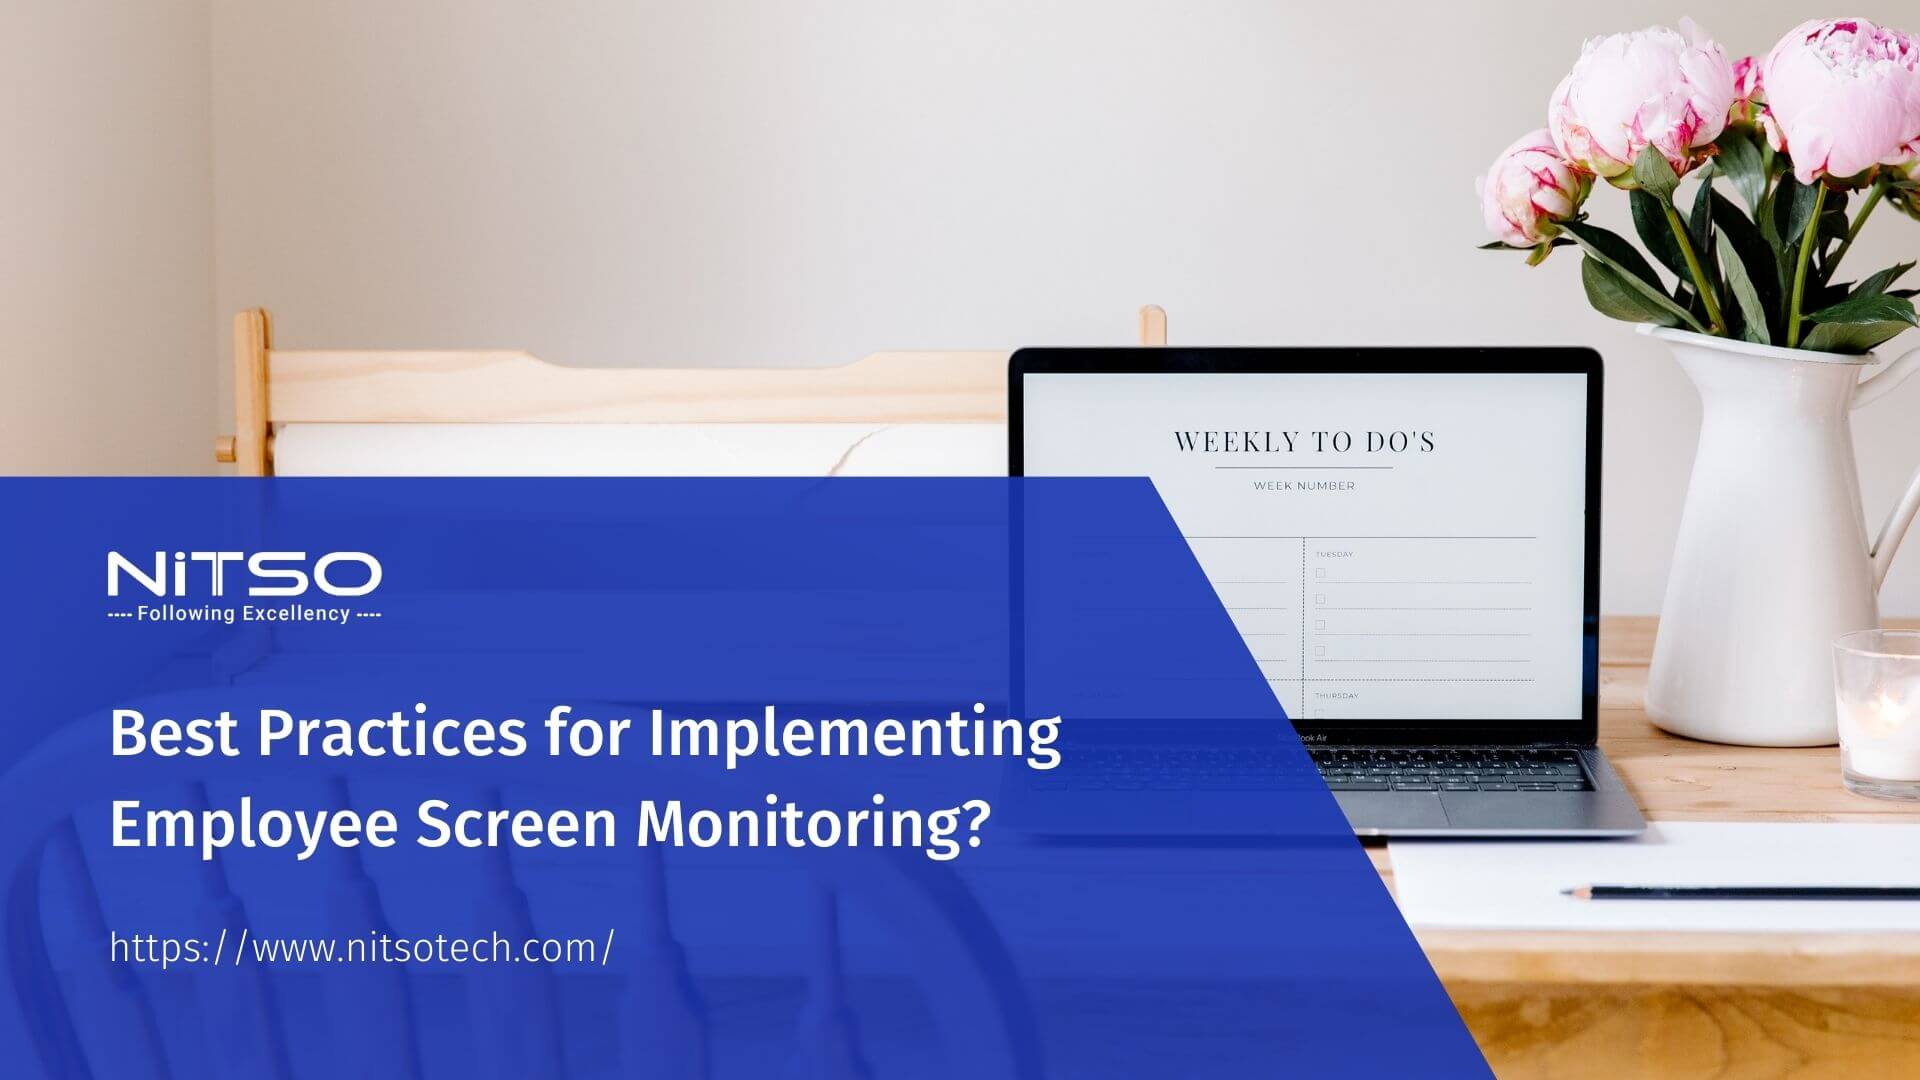 Maximizing Productivity: How to Implement Employee Screen Monitoring?